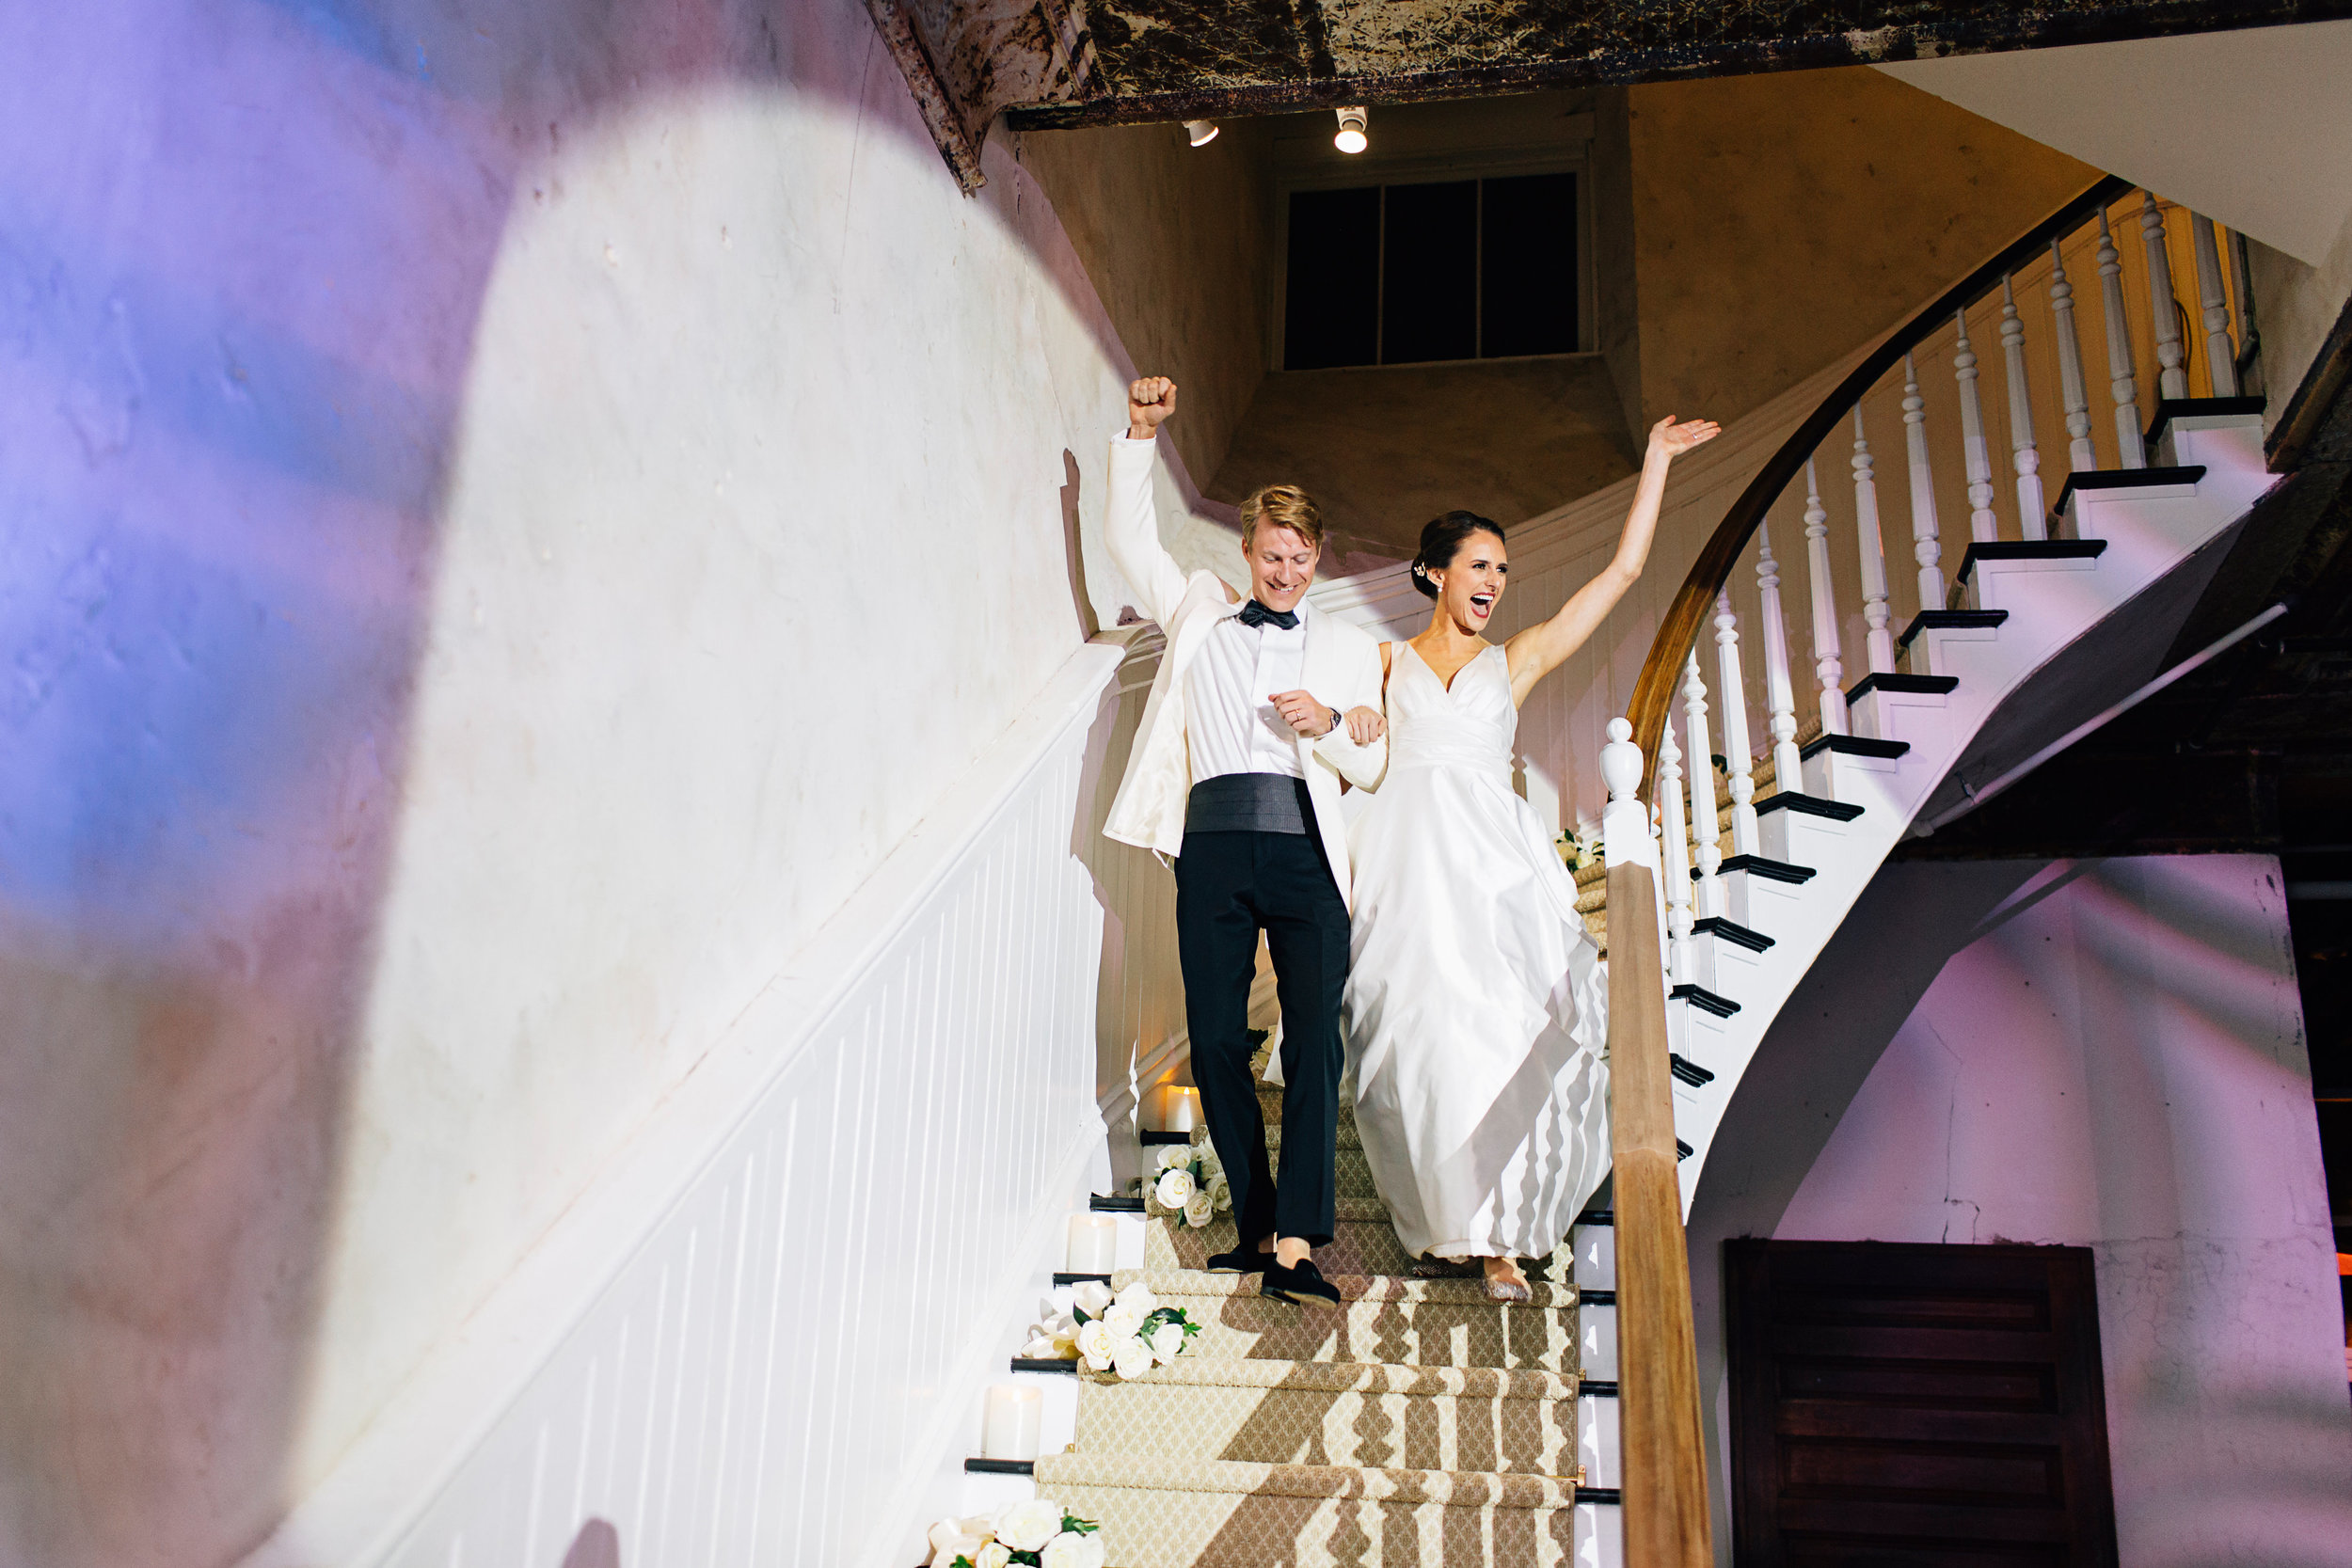 Married couple wedding reception entrance waving with spotlight